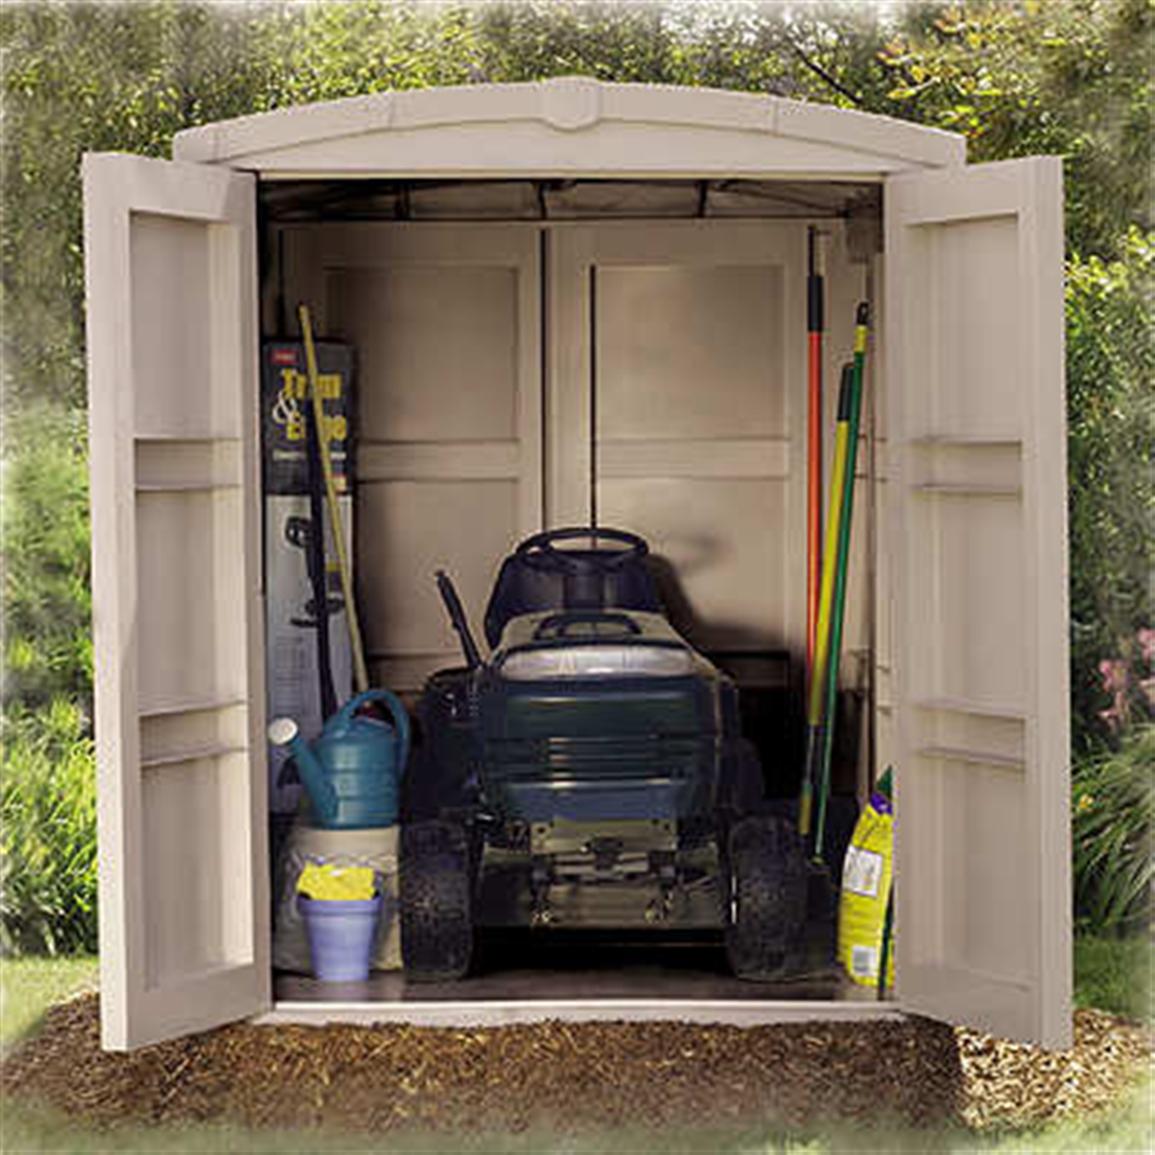 Suncast® Extra Large Storage Shed - 138473, Patio Storage at Sportsman's Guide